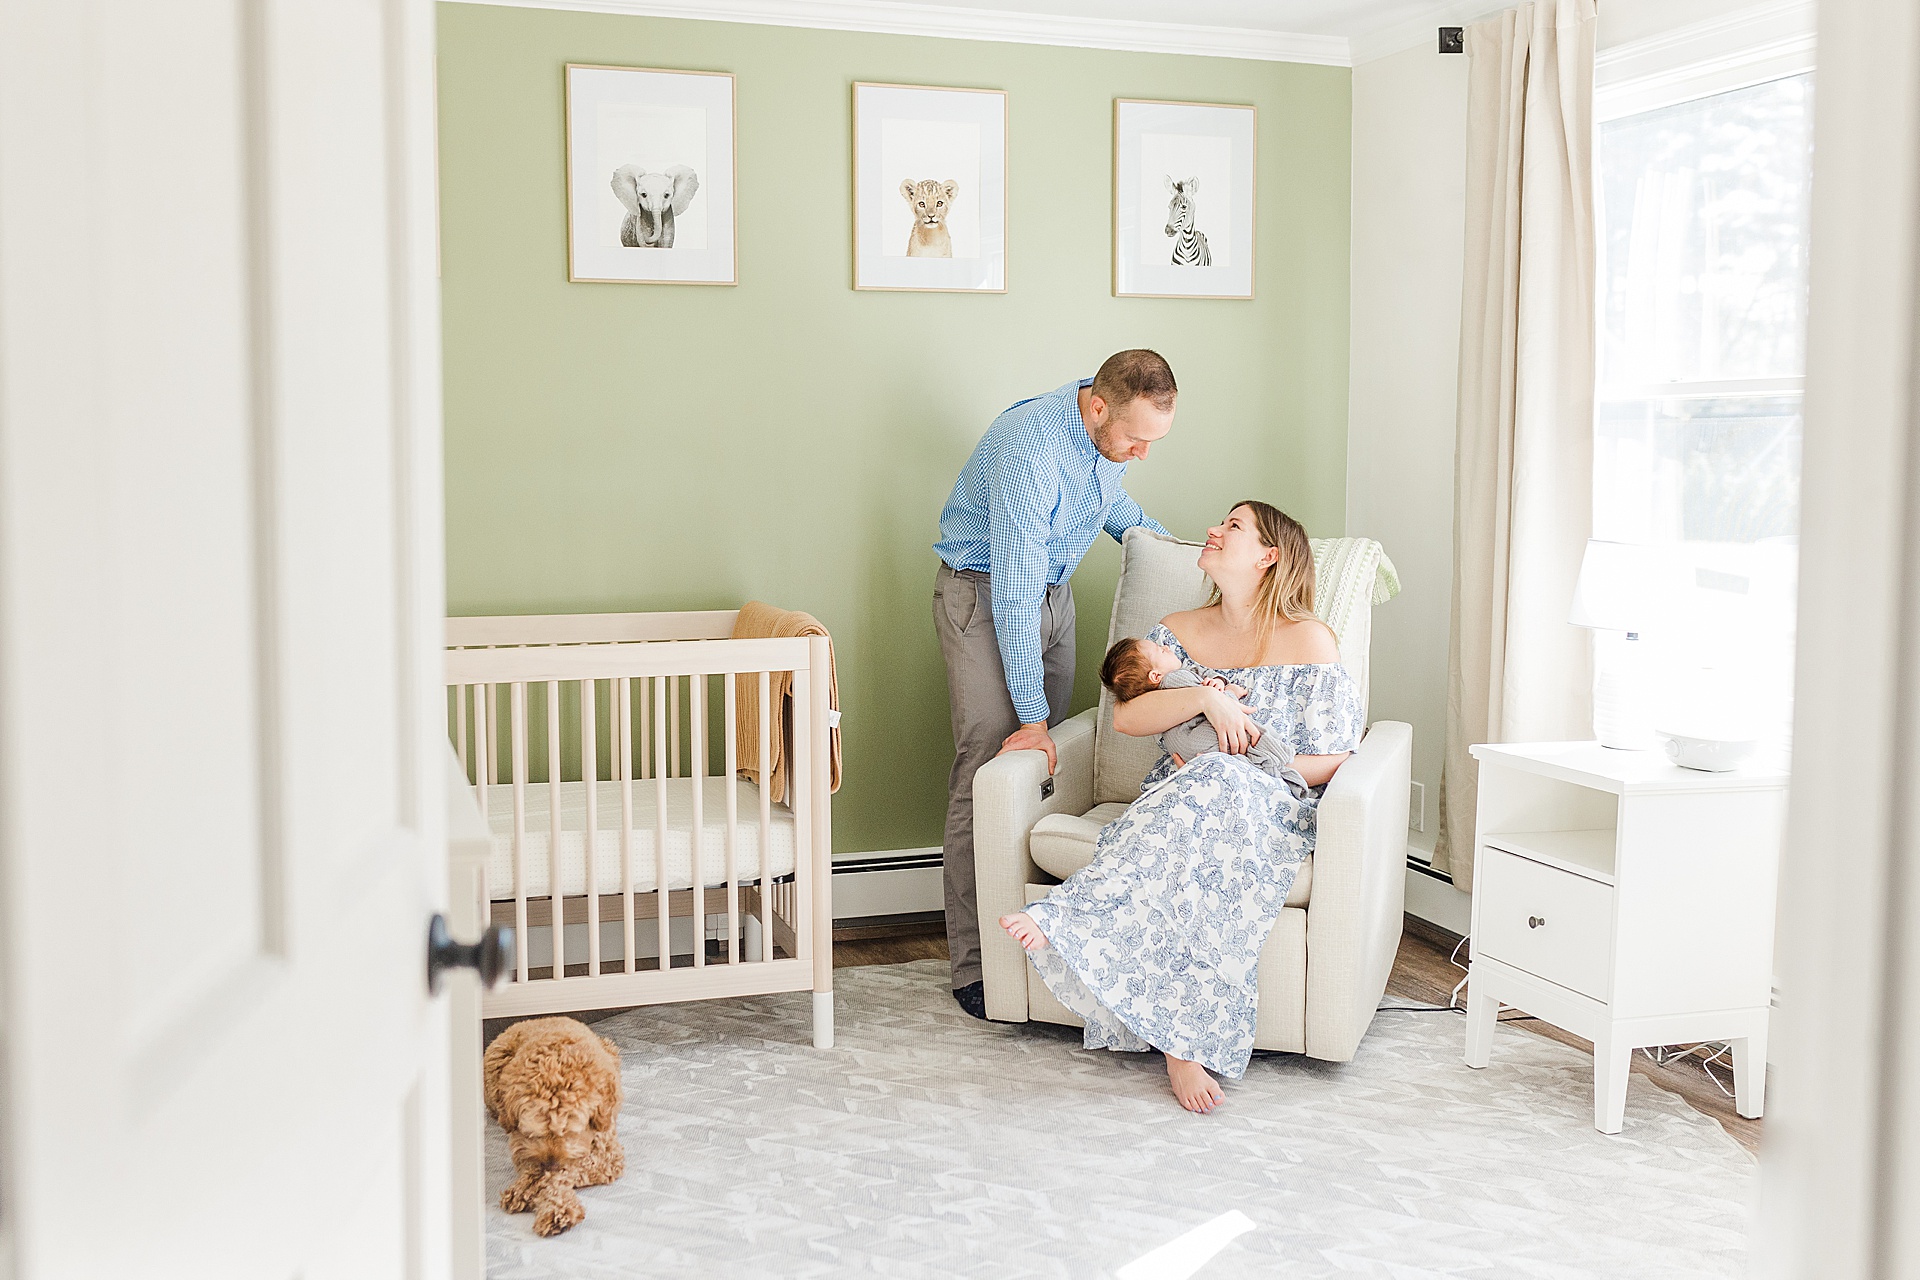 Where Should I Take My Newborn Photos? | In-home newborn photo session with Sara Sniderman Photography in Metro West Boston Massachusetts